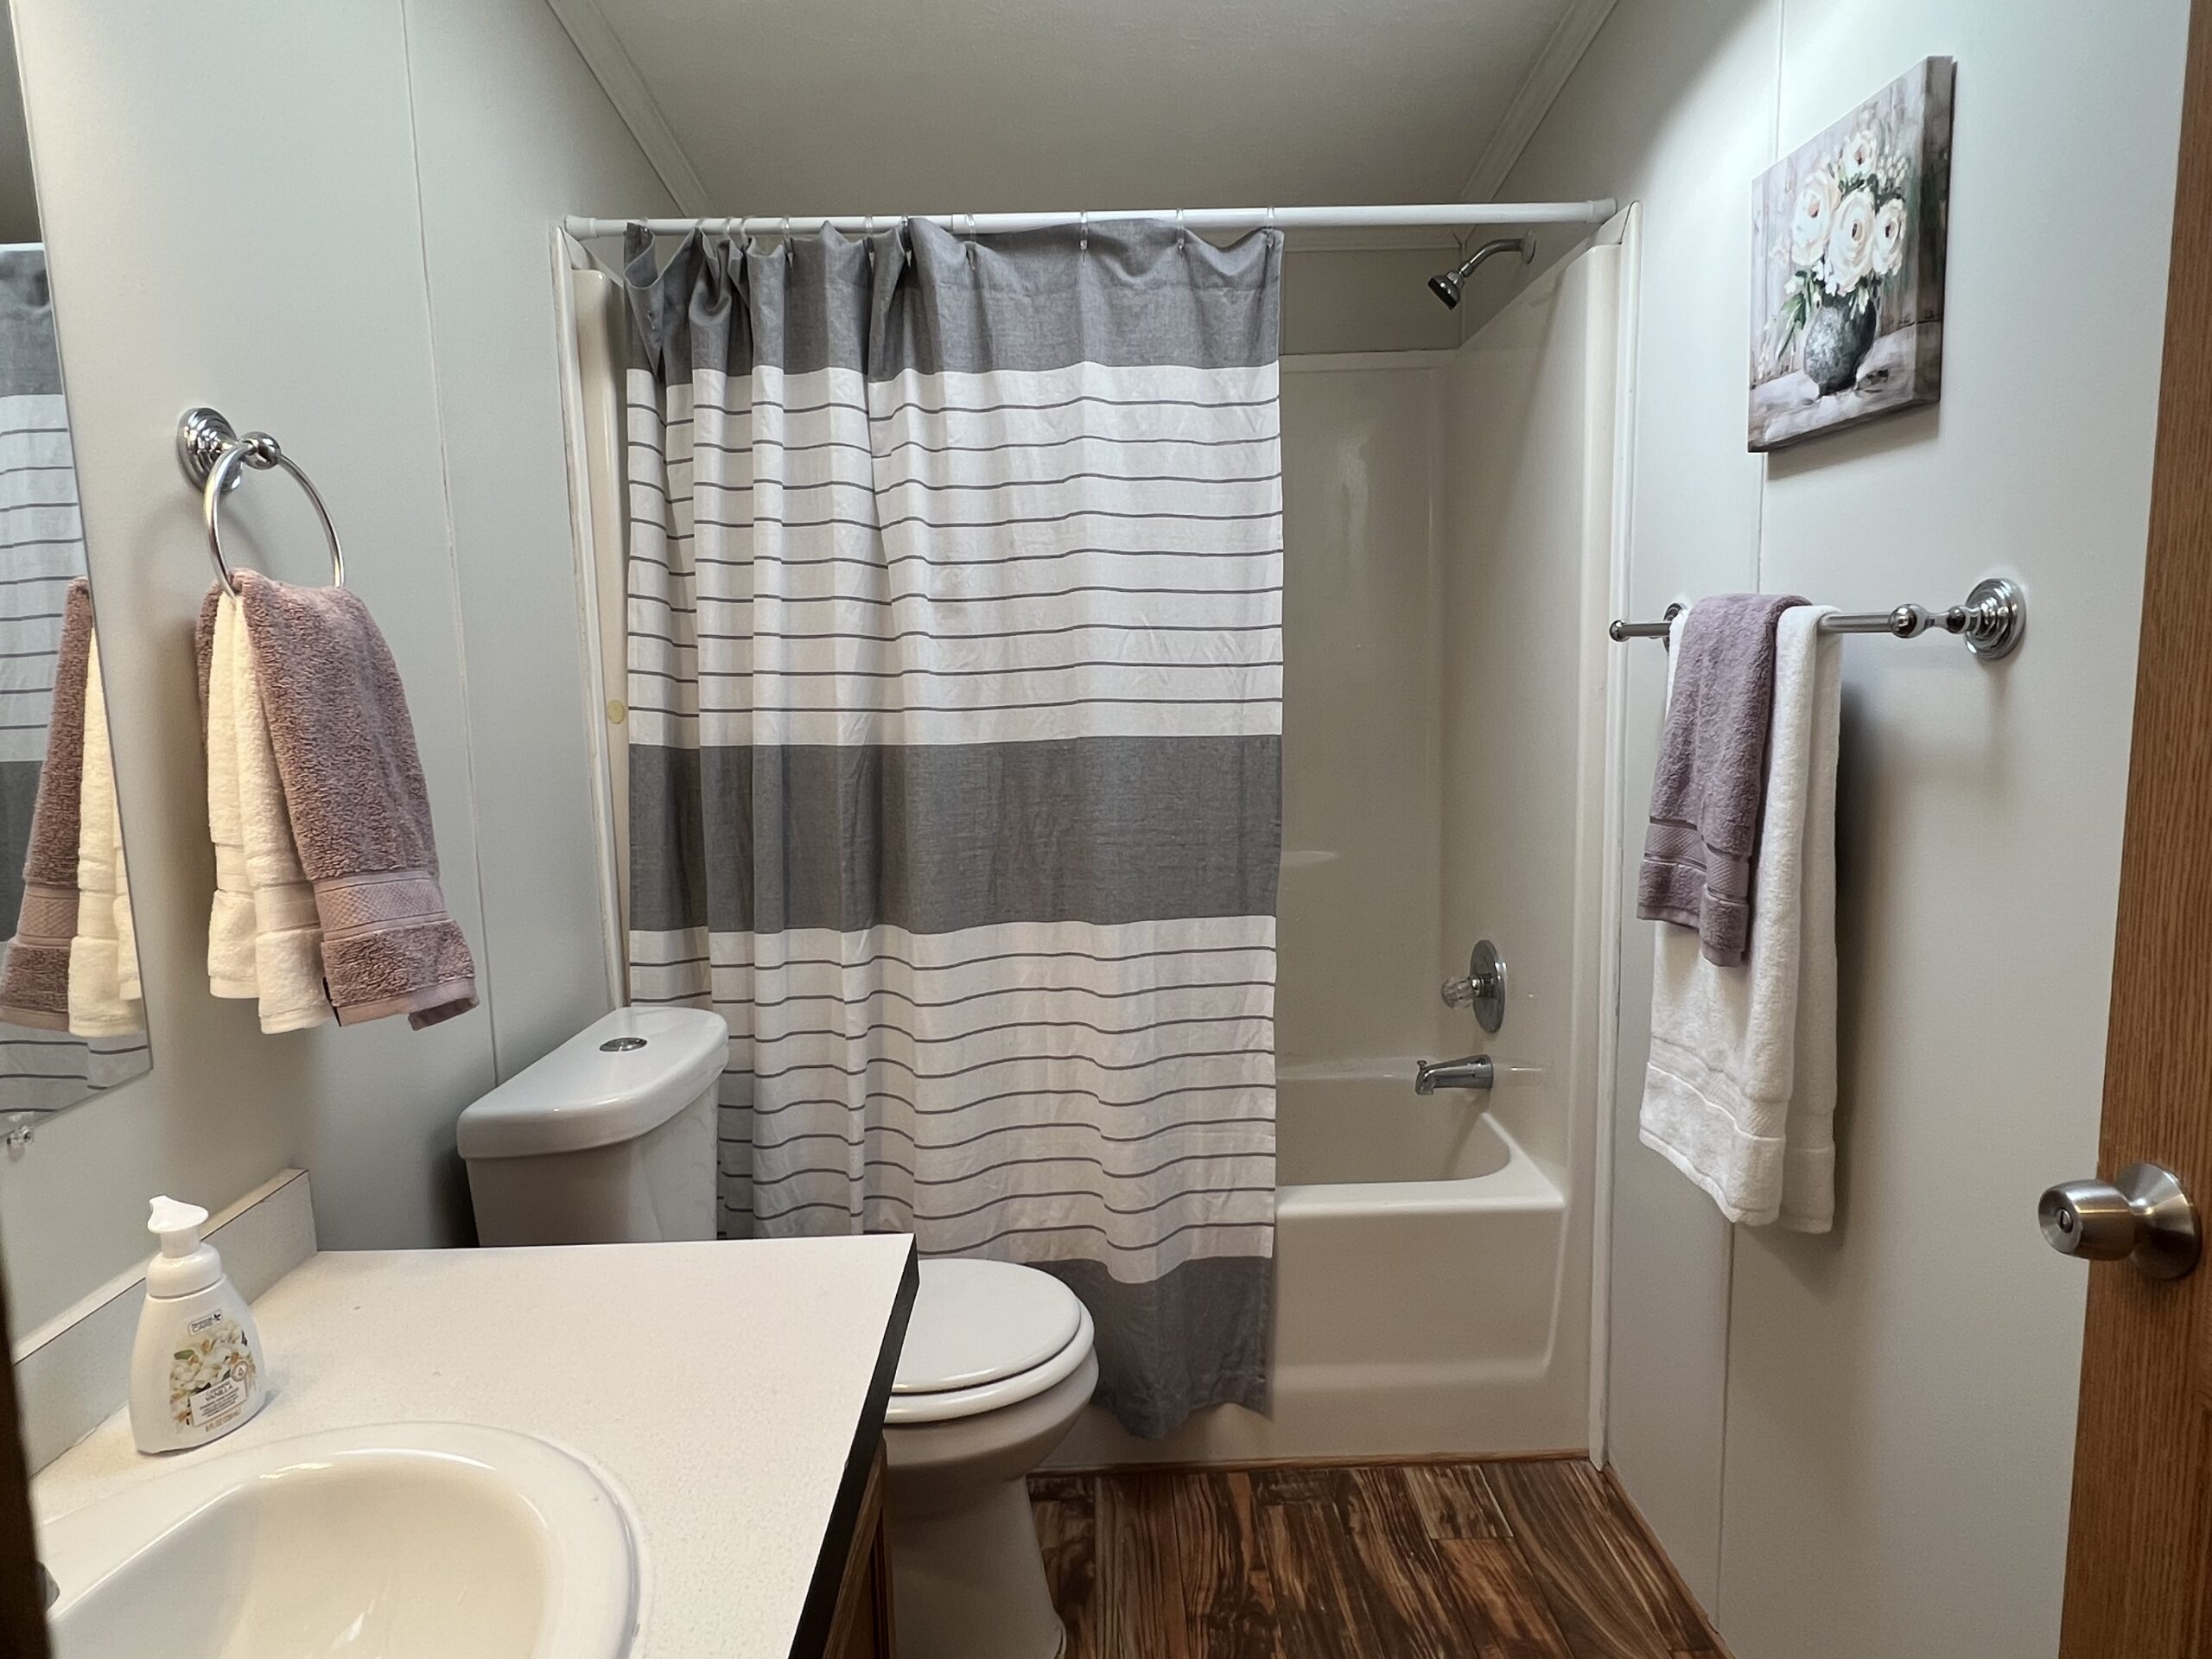 NEWLY REMODELED HOME – UPGRADED AMENITIES